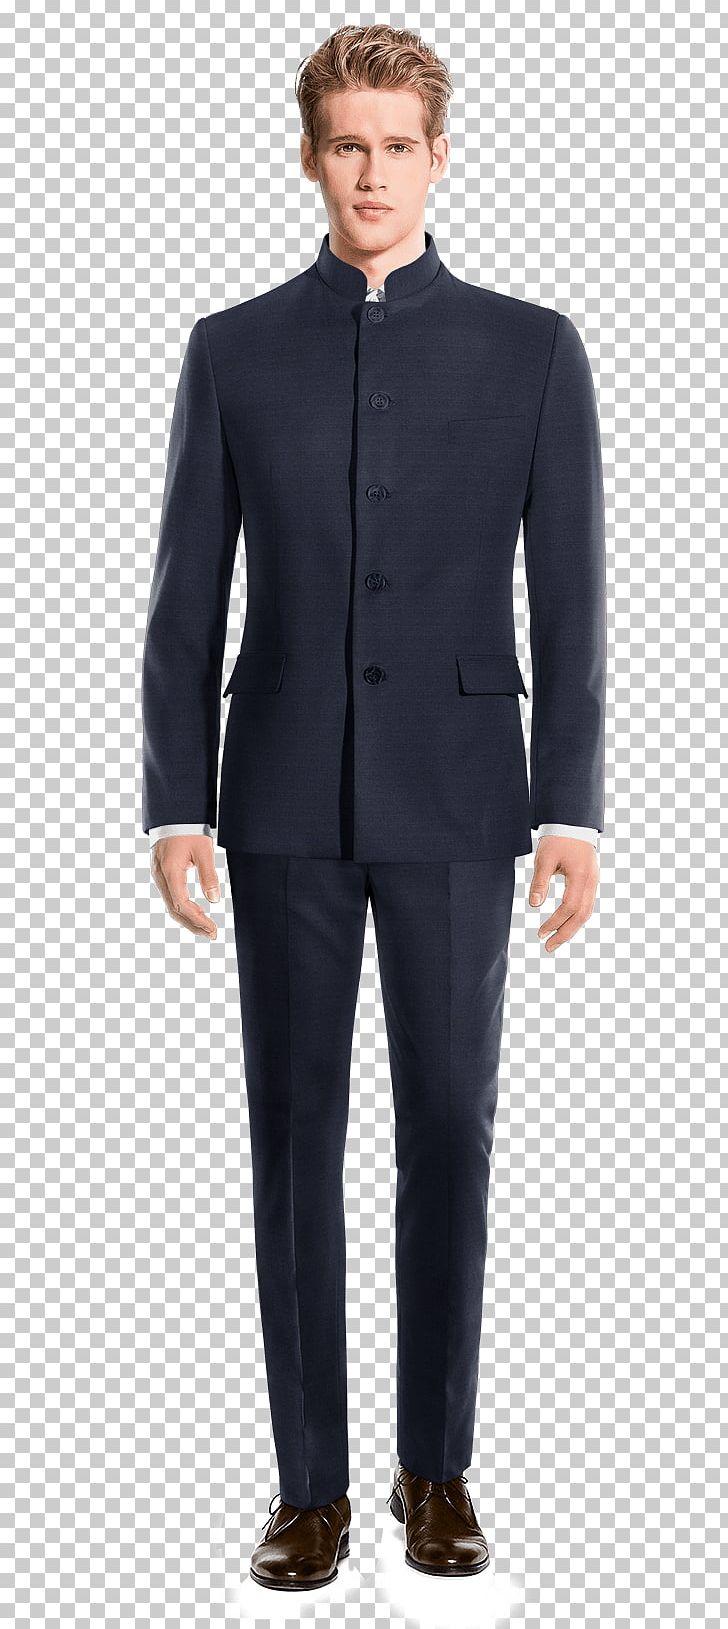 Sport Coat Chino Cloth Pants Blue Upturned Collar PNG, Clipart, Blazer, Blue, Businessperson, Chino Cloth, Clothing Free PNG Download